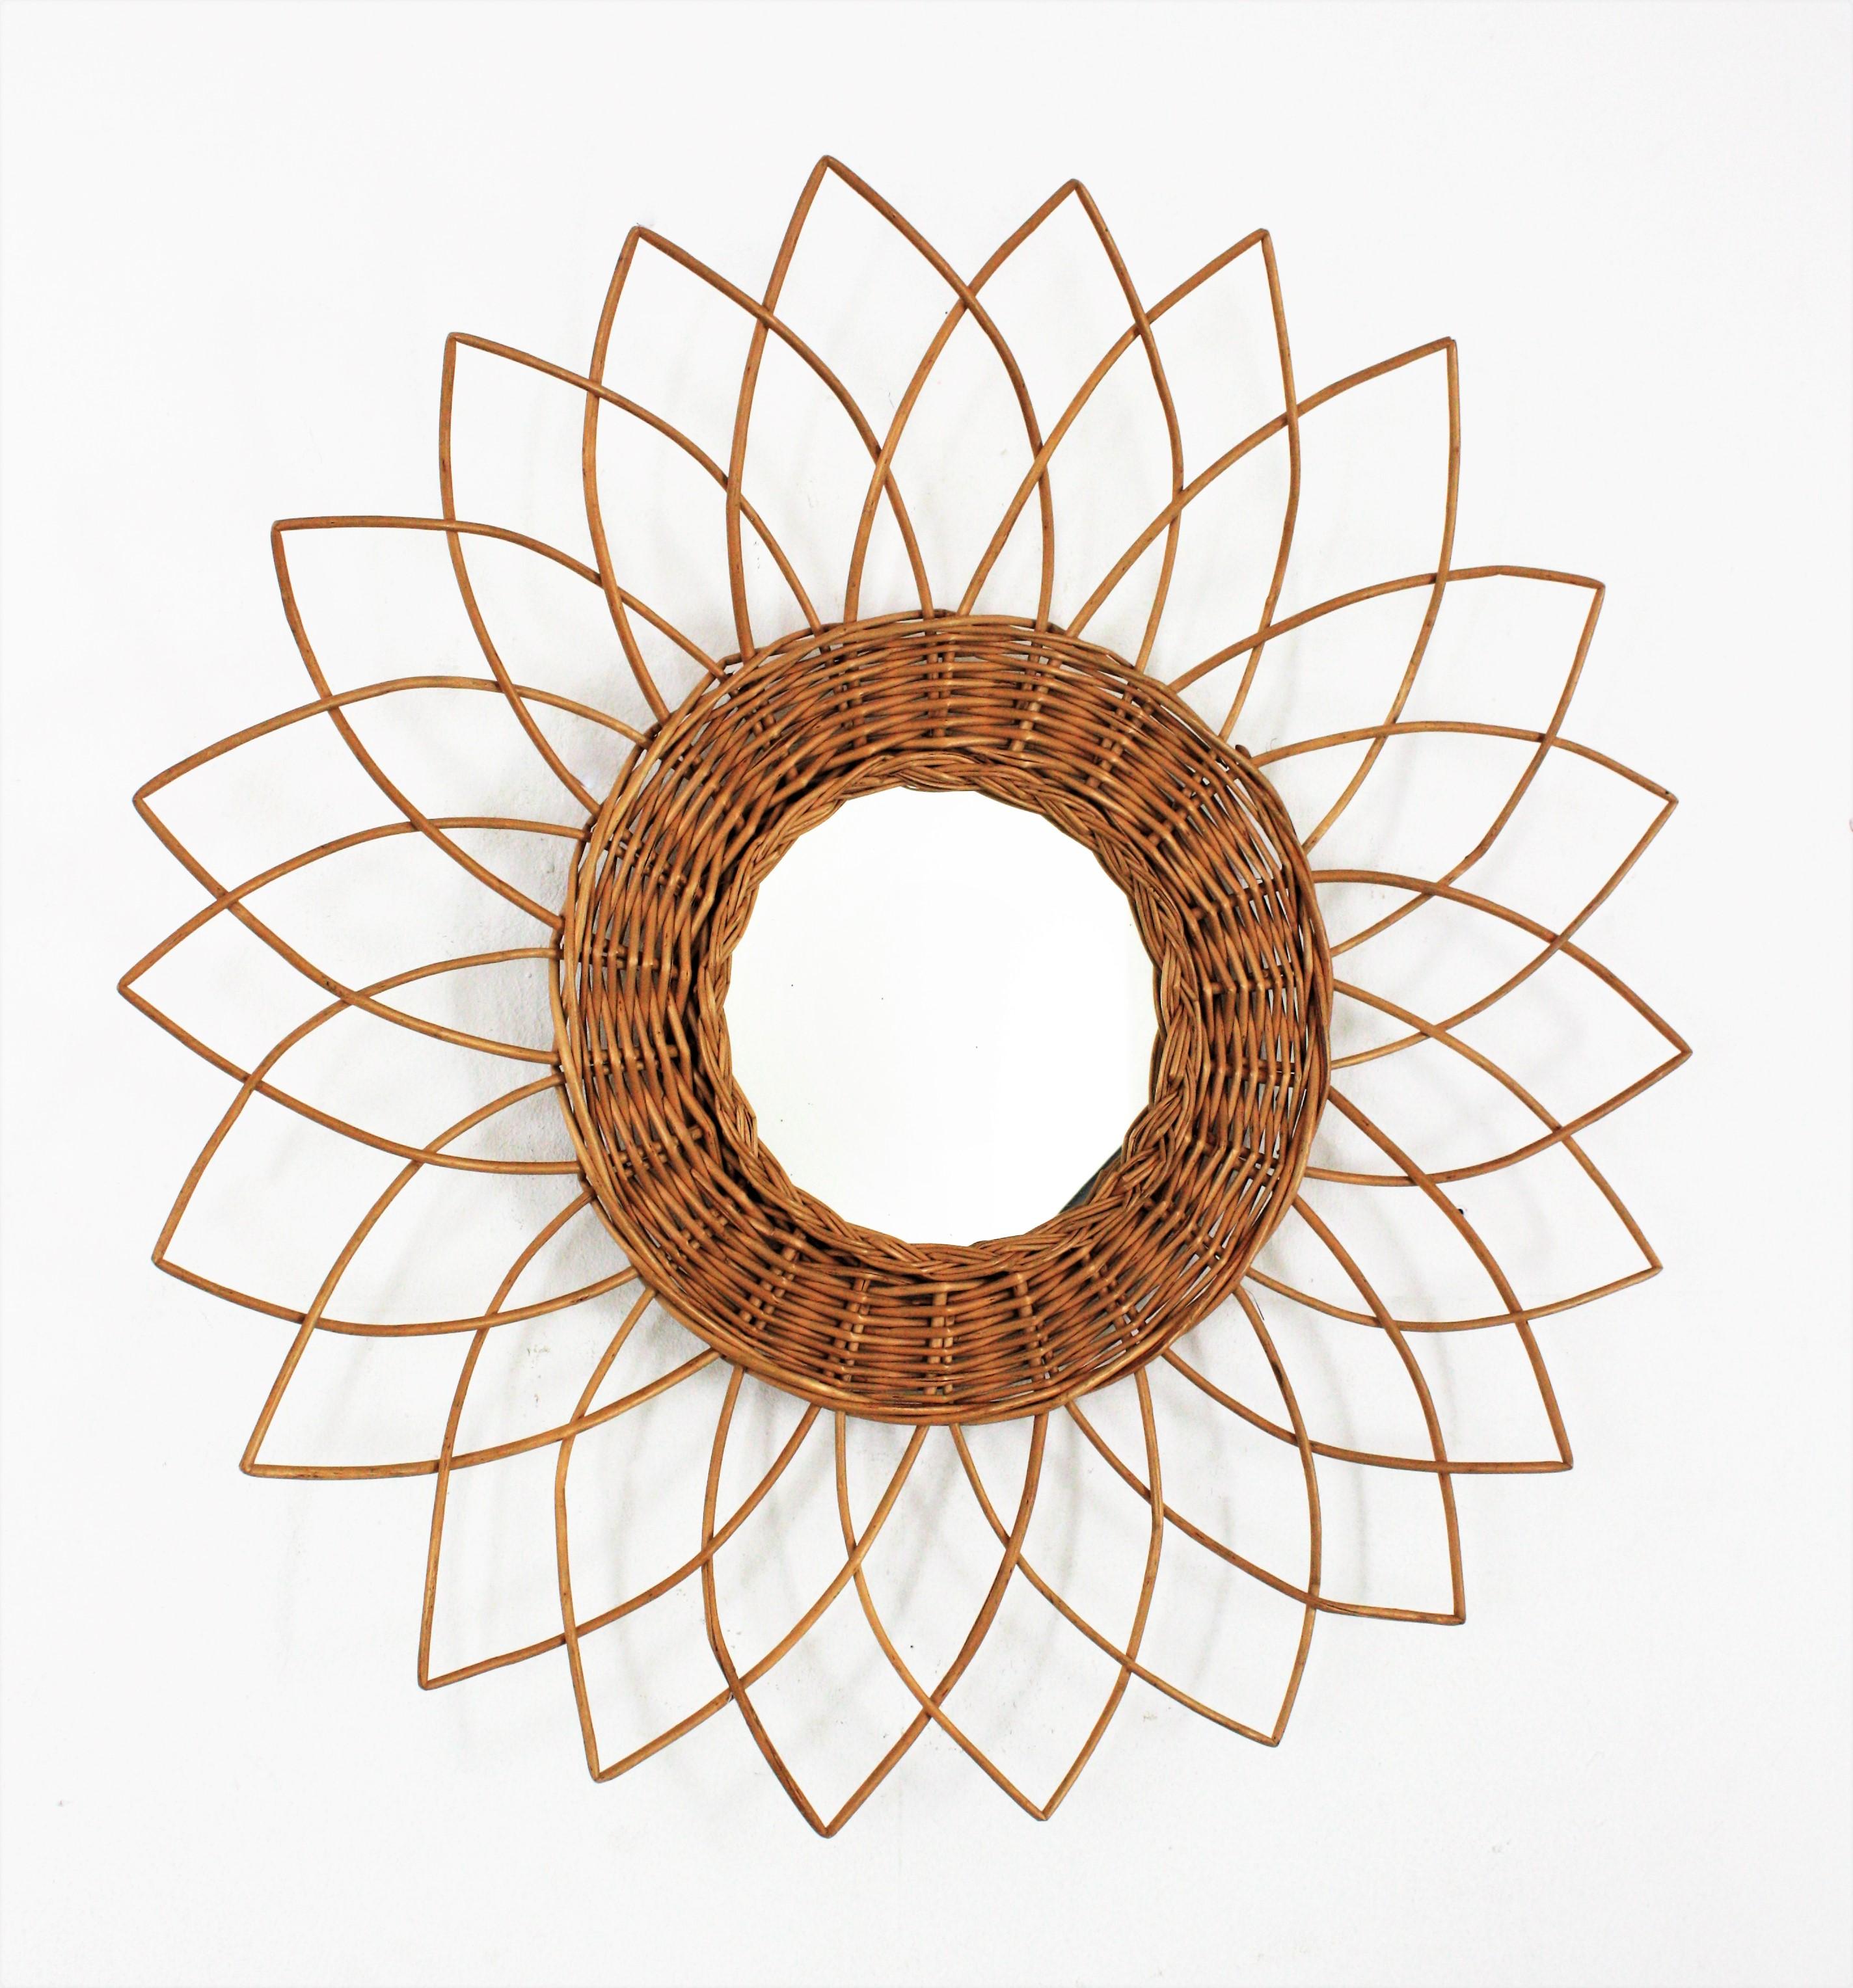 French Riviera Sunburst Starburst Mirror in Rattan, 1960s
Handcrafted starburst / sunburst / flower mirror with rattan frame, France, 1960s.
This eye-catching mediterranean sunburst mirror was handcrafted in France at the sixties and It has all the